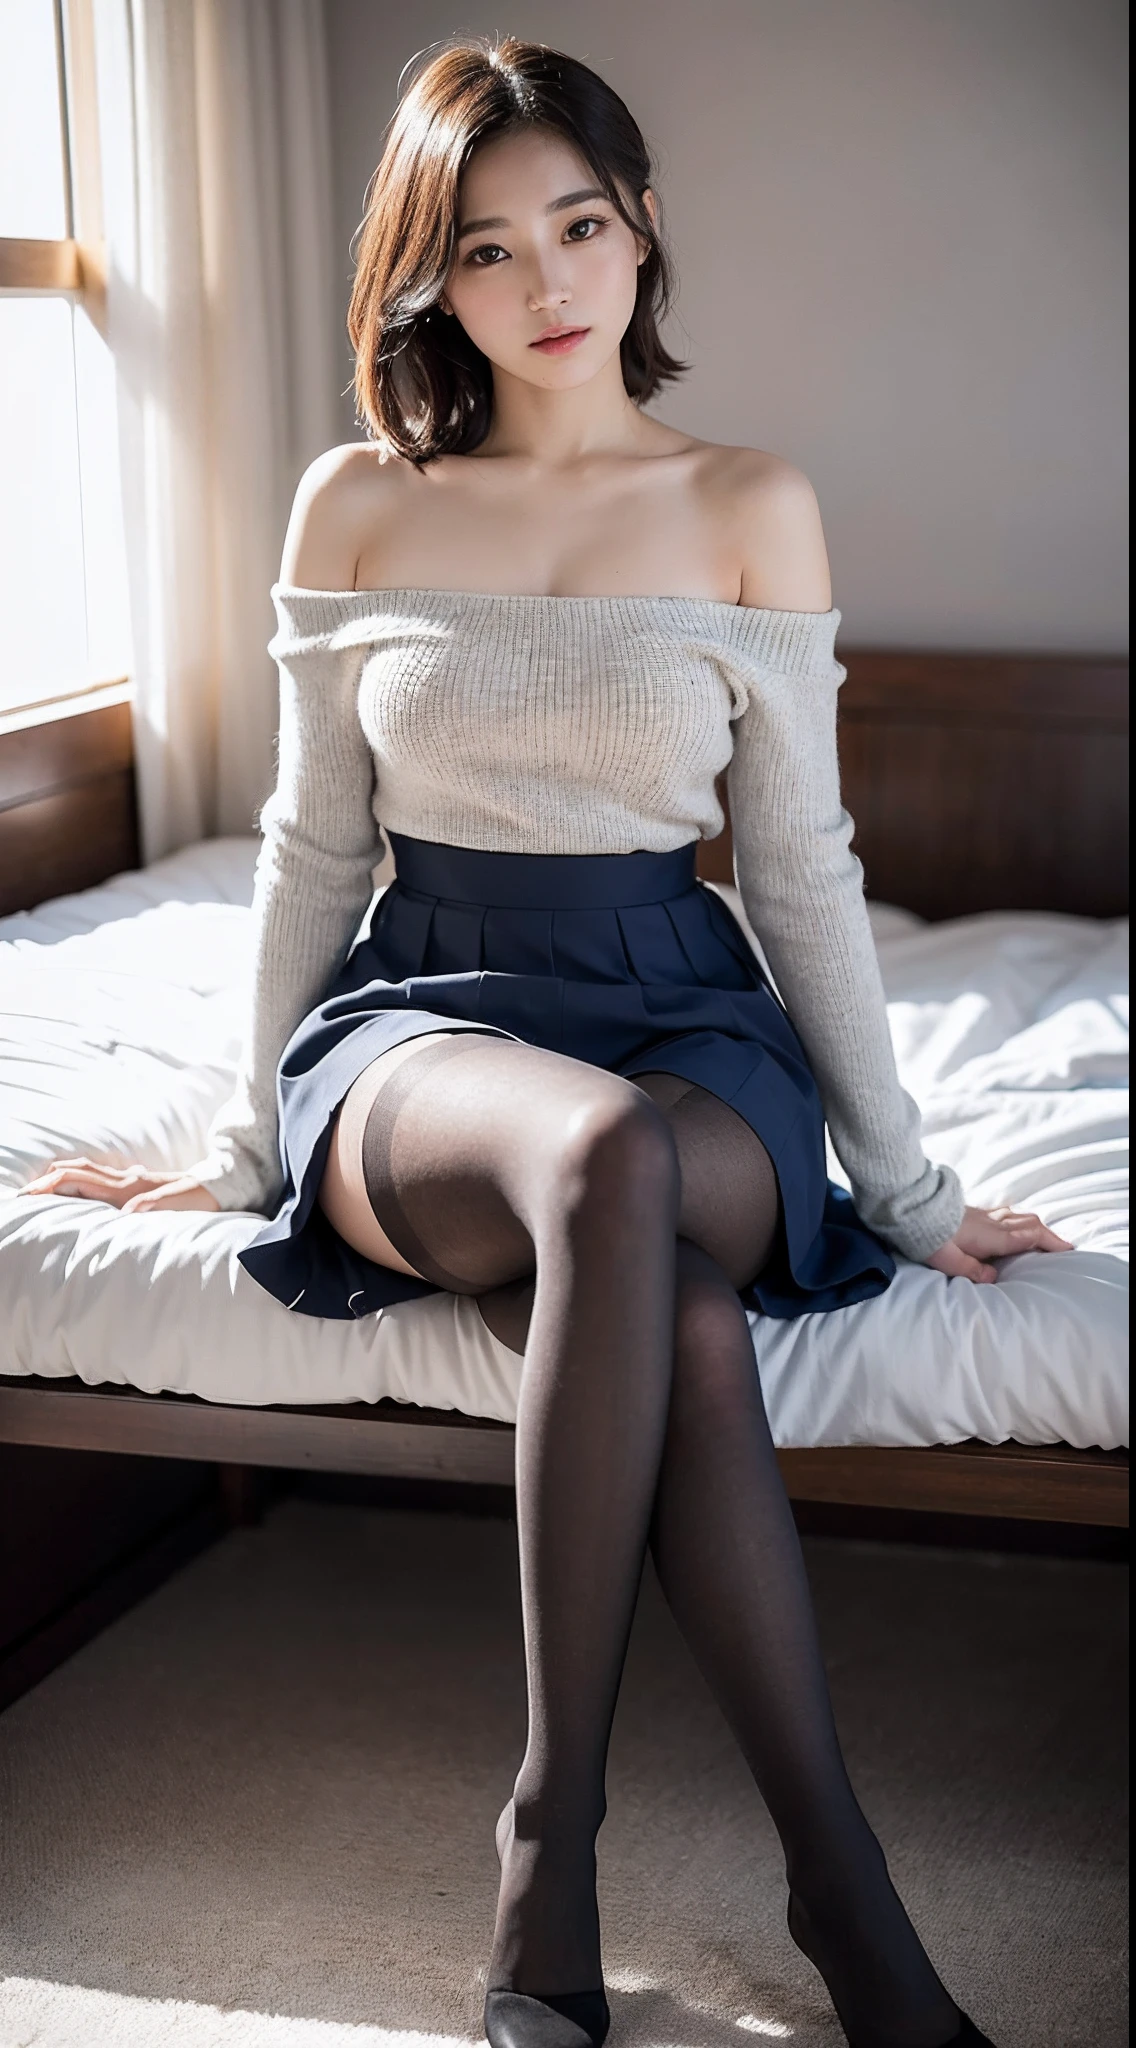 face is :9,503917907], Real 19-year-old college girl from upper class、Wearing a knitted dress、Sitting in the comfort of your room、 (Wearing pantyhose、Very realistic pantyhose)、thighs thighs thighs thighs、165 cm tall, Japanese Models, Short Layer Hair、japanaese girl, Neat and clean Japan woman, A smile、Smile、goddess of Japan, Innocence、Realistic Pantyhose、Raw photo, (8K、top-quality、​masterpiece:1.2)、(intricate detailes:1.4)、(Photorealsitic:1.4)、octane renderings、Complex 3D rendering ultra detail, studio lights, Rim Lights, vibrant detail, super detailing, Realistic Pantyhose、realistic skin textures, Detail Face, Beautiful detail eyes, Very detailed CG Unity 16k wallpaper, make - up, (detailedbackground:1.2), shinny skin、turned around、Exposed thighs!!!